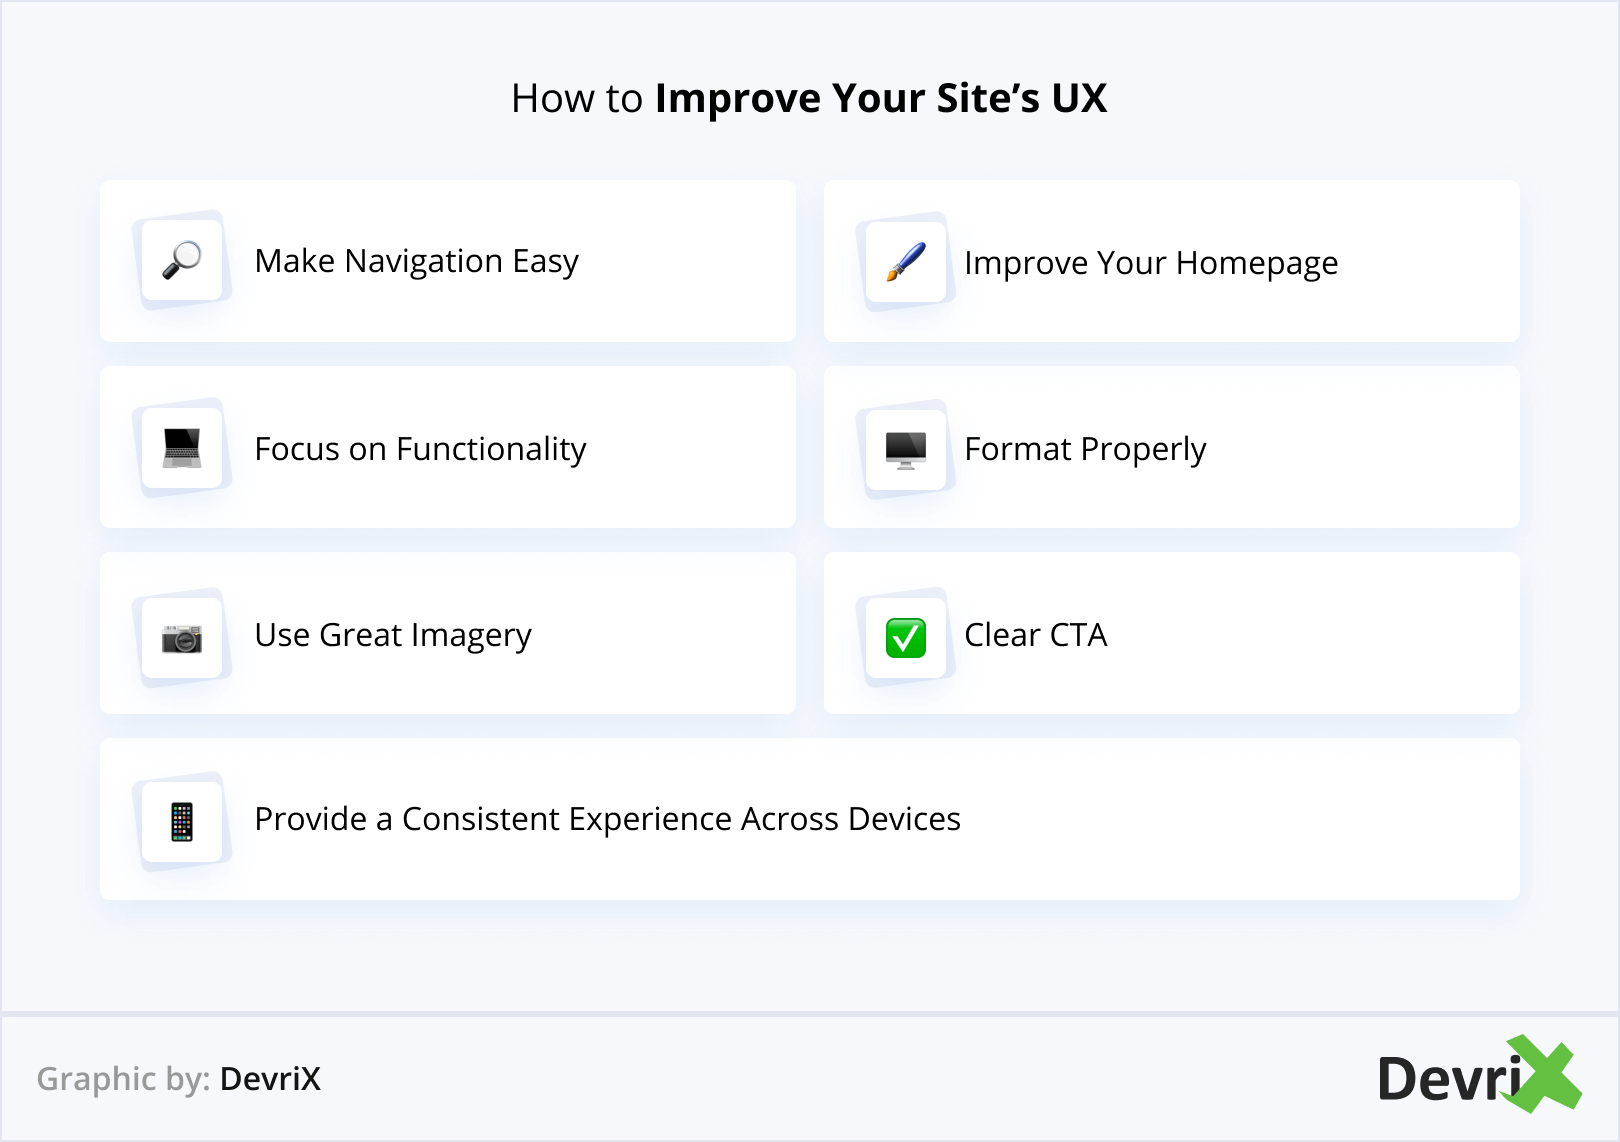 How to Improve Your Site’s UX